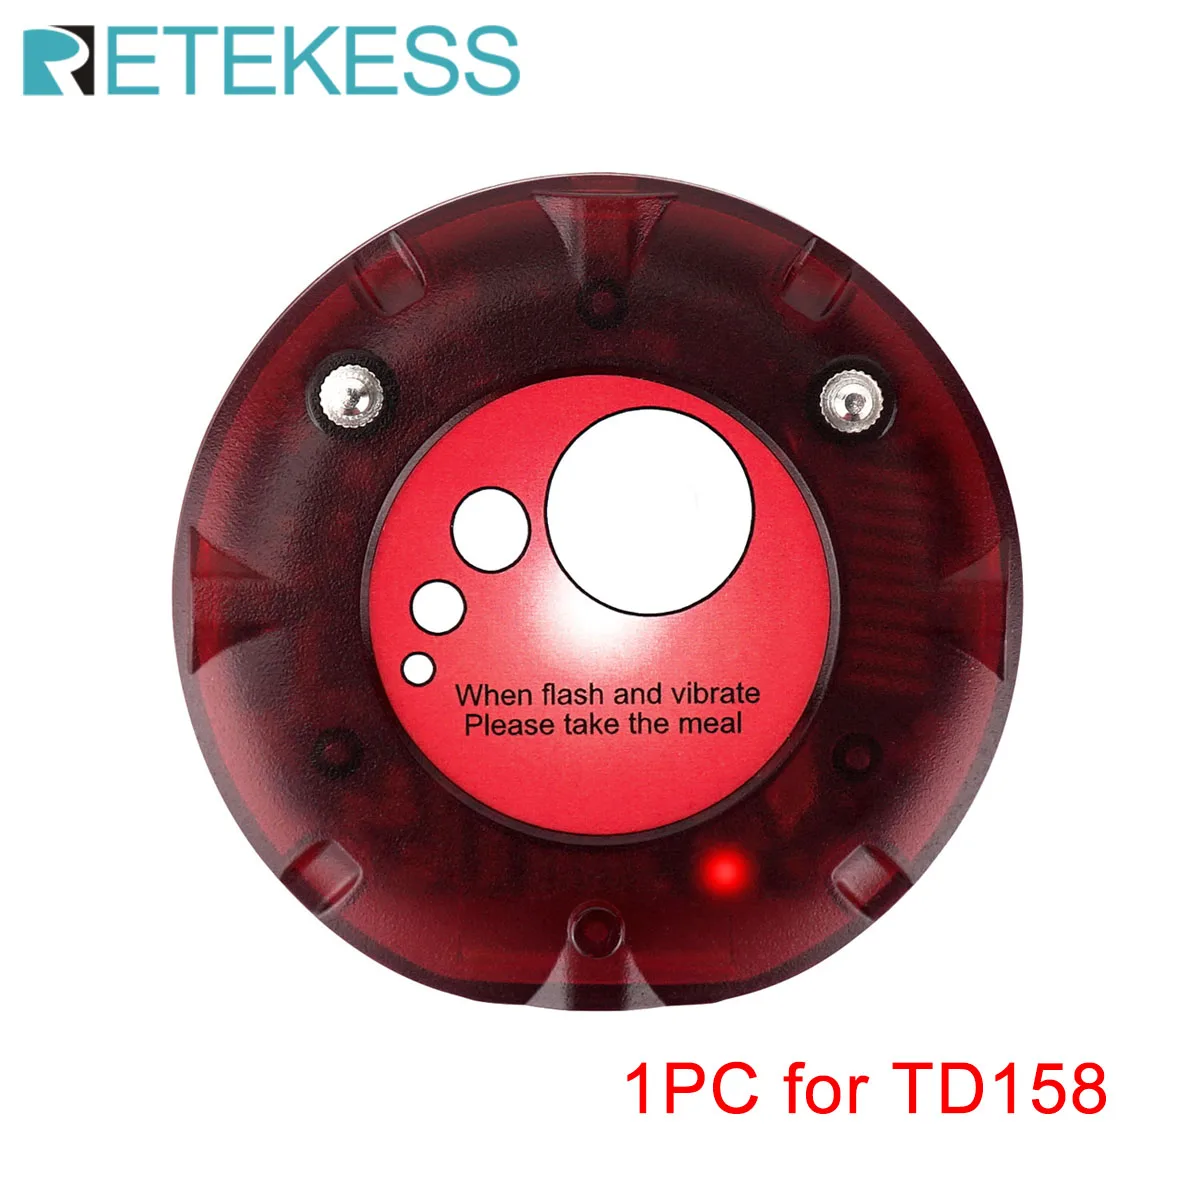 

Retekess Coaster Pager Receiver For TD158 Wireless Calling Paging System Restaurant Coffee Shop Church Clinic